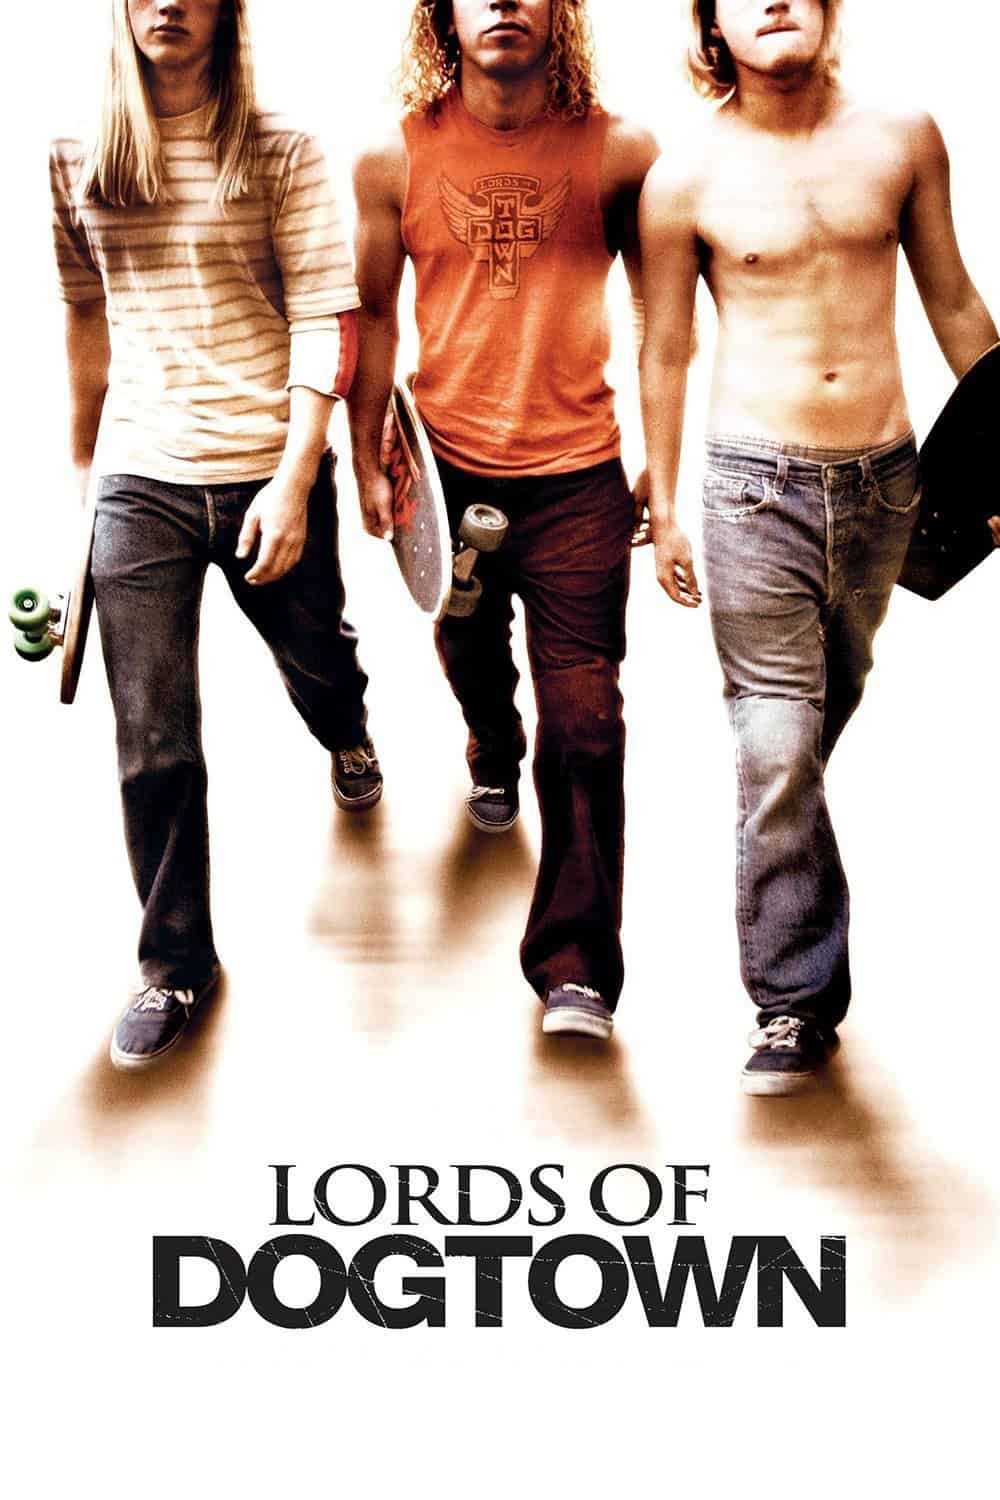 Lords of Dogtown, 2005 